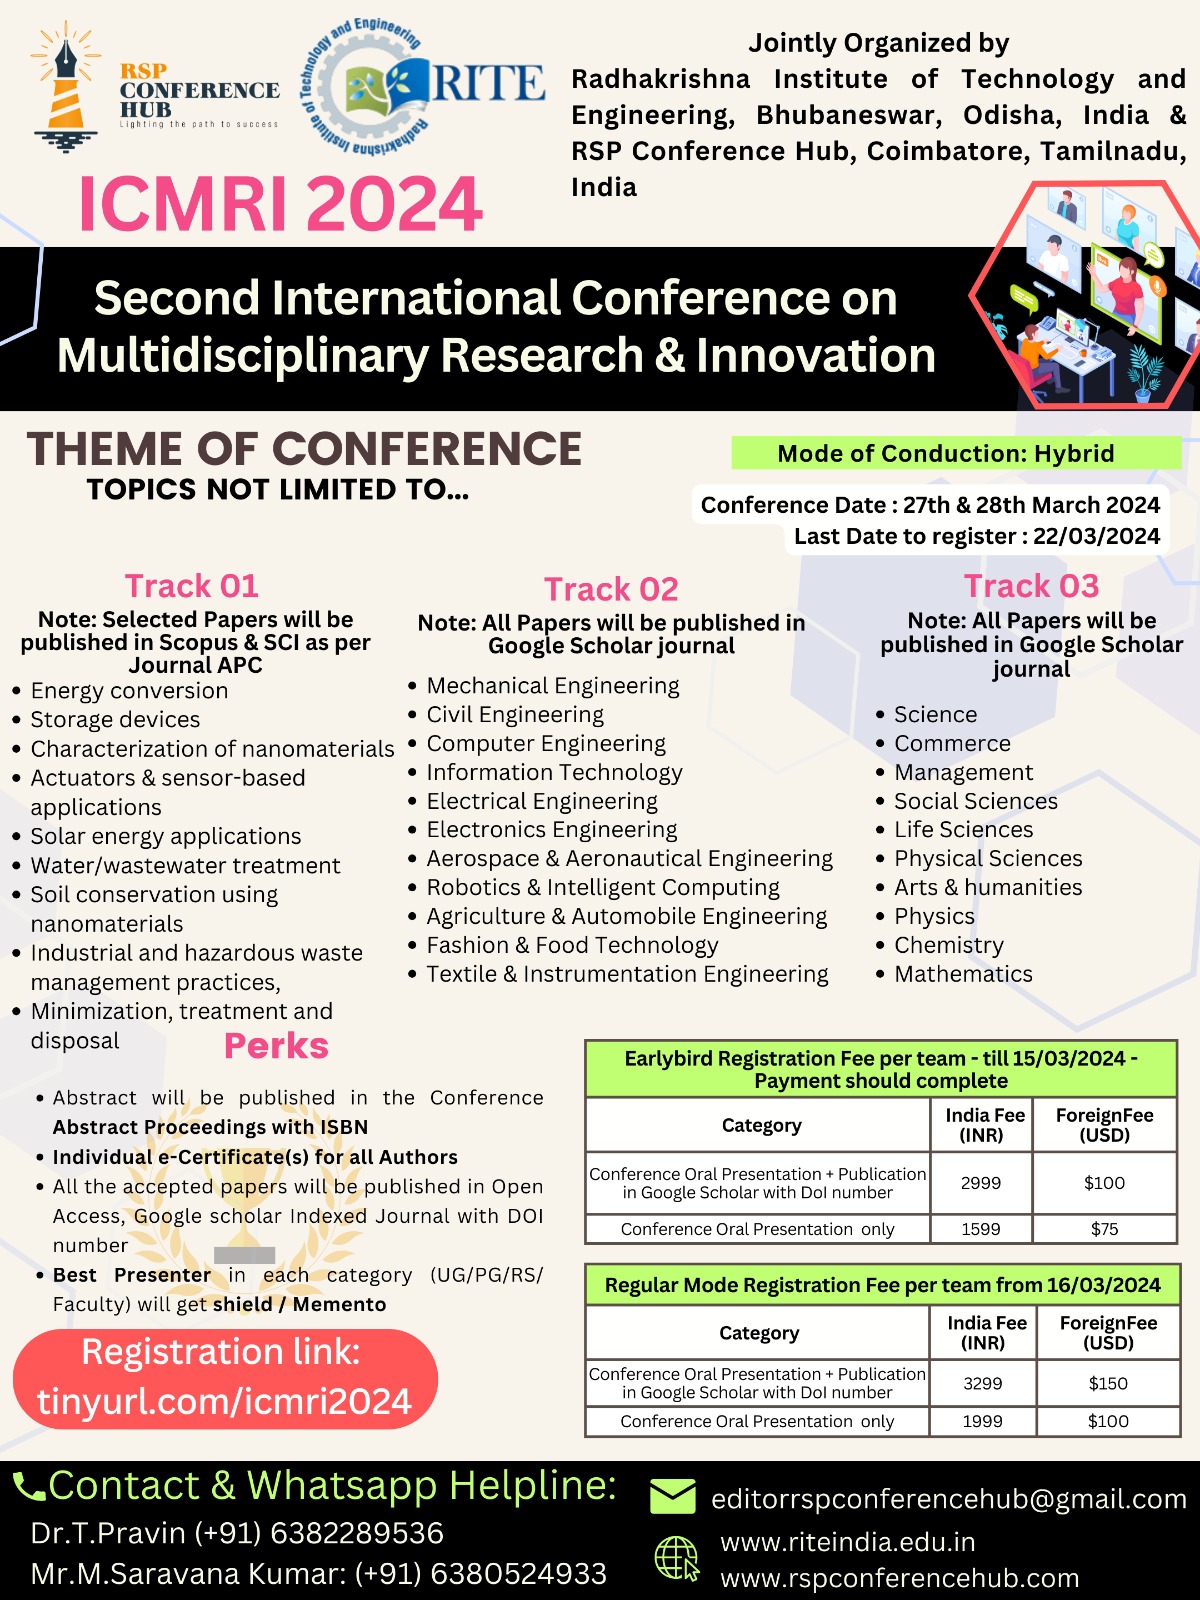 Second International Conference on Multidisciplinary Research and Innovation ICMRI 2024